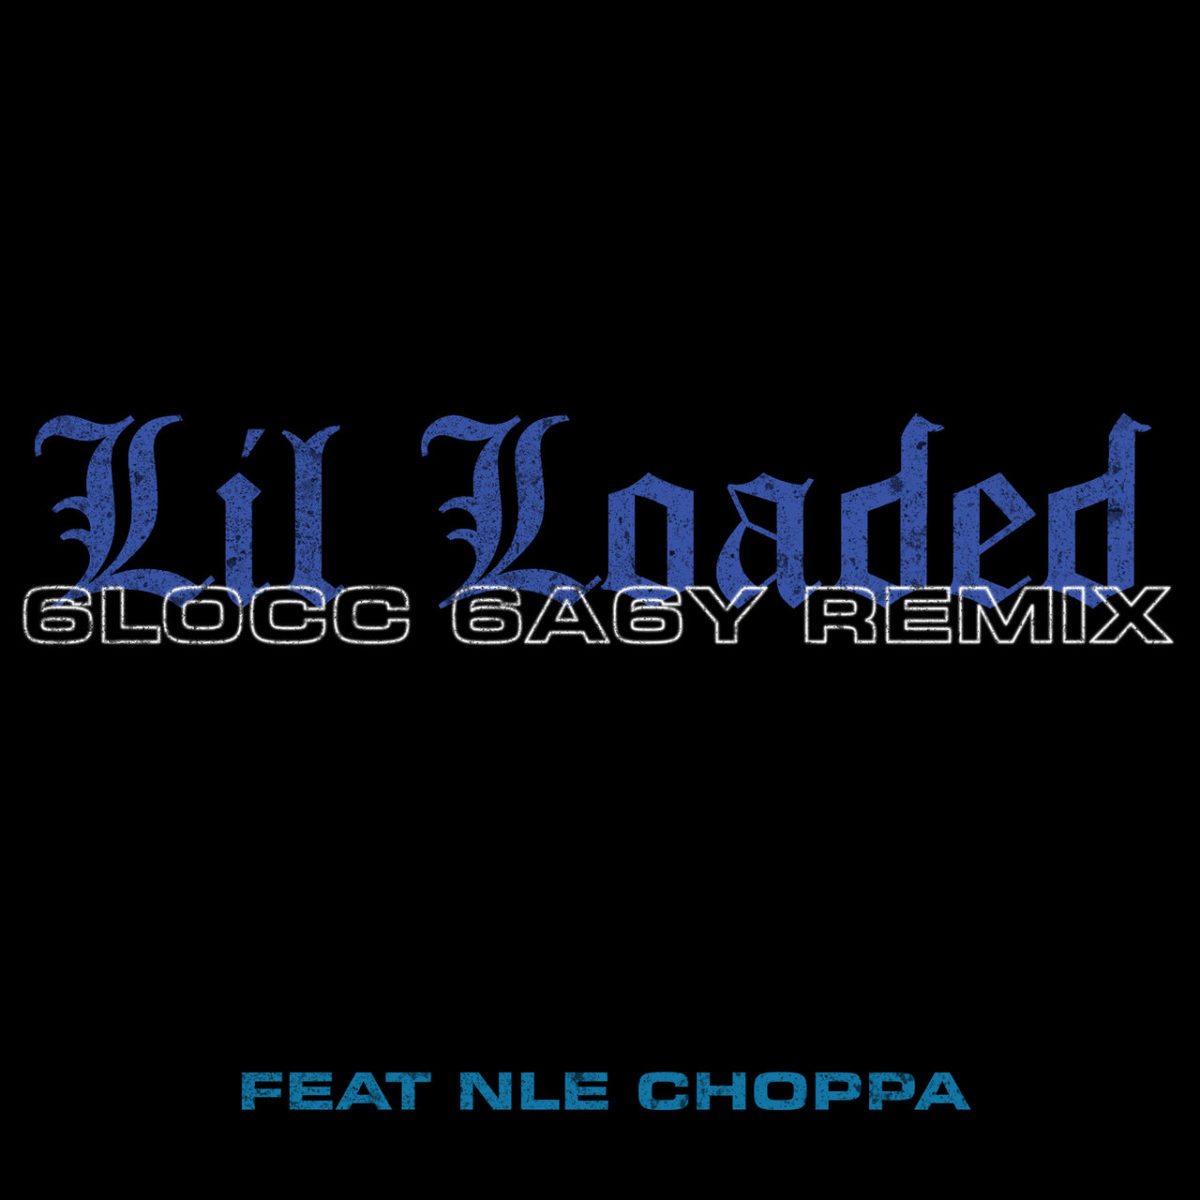 Lil Loaded - 6locc 6a6y (Remix) (ft. NLE Choppa) (Cover)